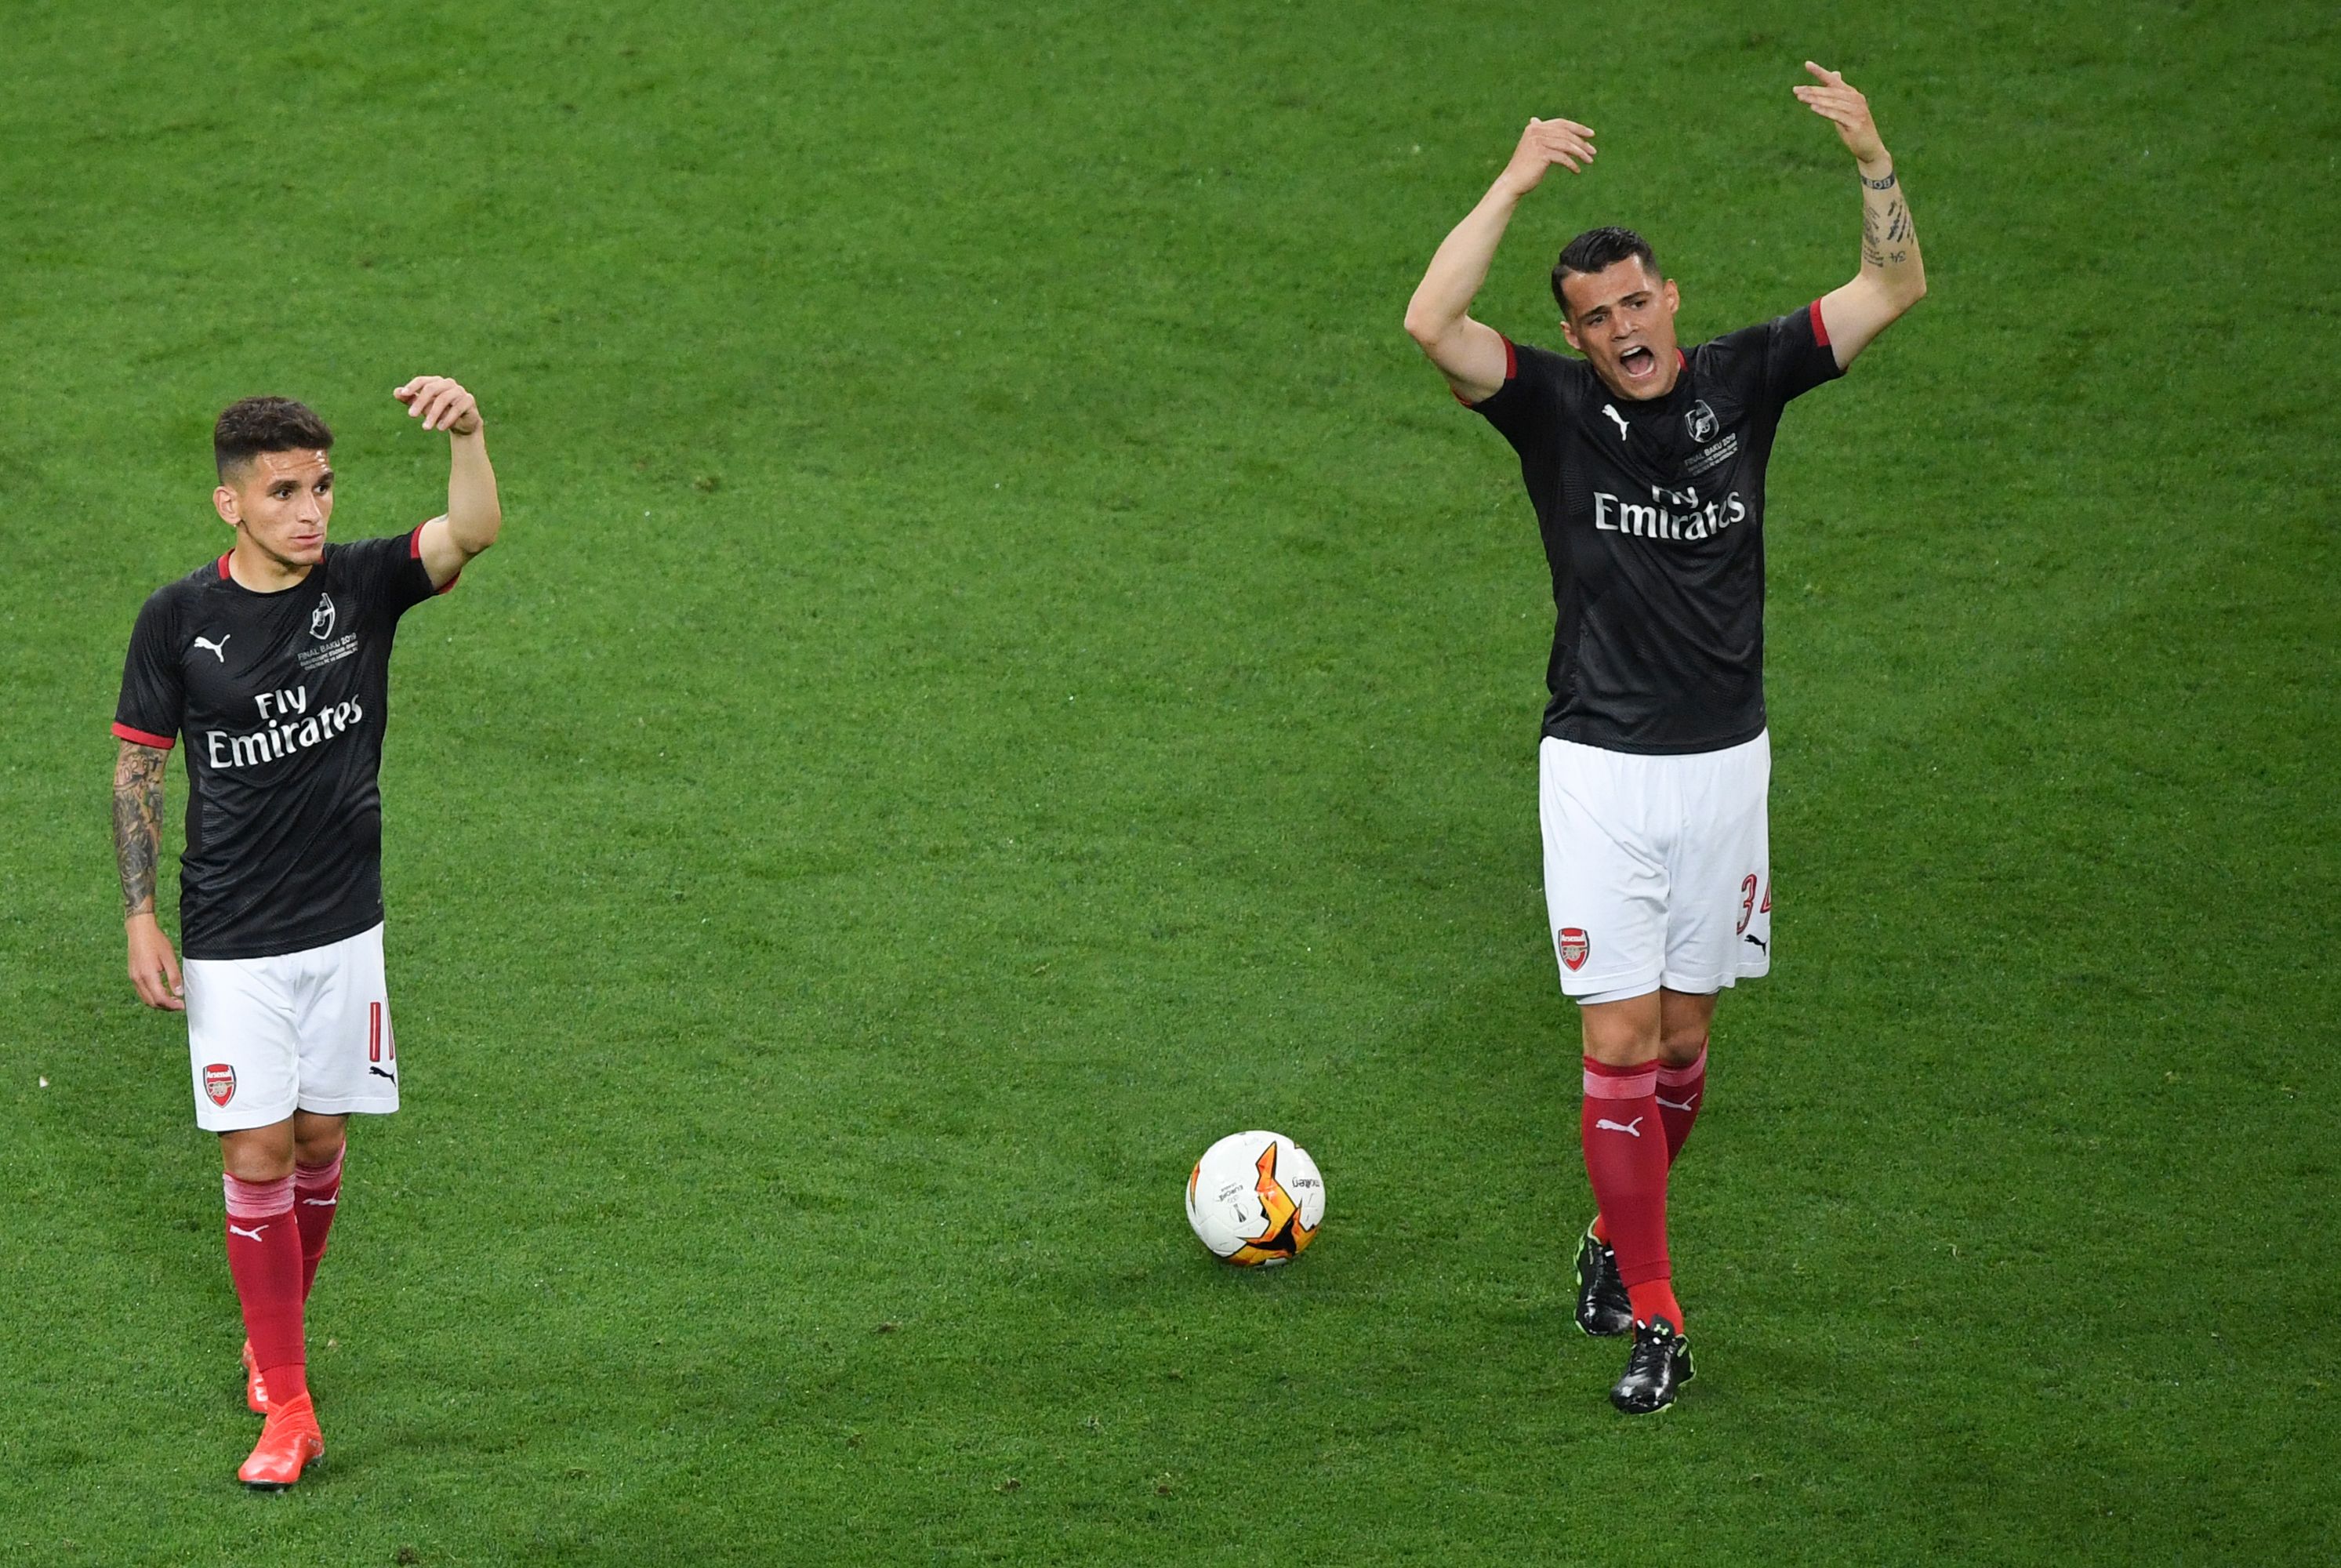 Arsenal's Swiss midfielder Granit Xhaka (R) and Arsenal's Uruguayan midfielder Lucas Torreira gesture during warm up prior to the UEFA Europa League final football match between Chelsea FC and Arsenal FC at the Baku Olympic Stadium in Baku, Azerbaijian on May 29, 2019. (Photo by Yuri KADOBNOV / AFP)        (Photo credit should read YURI KADOBNOV/AFP via Getty Images)